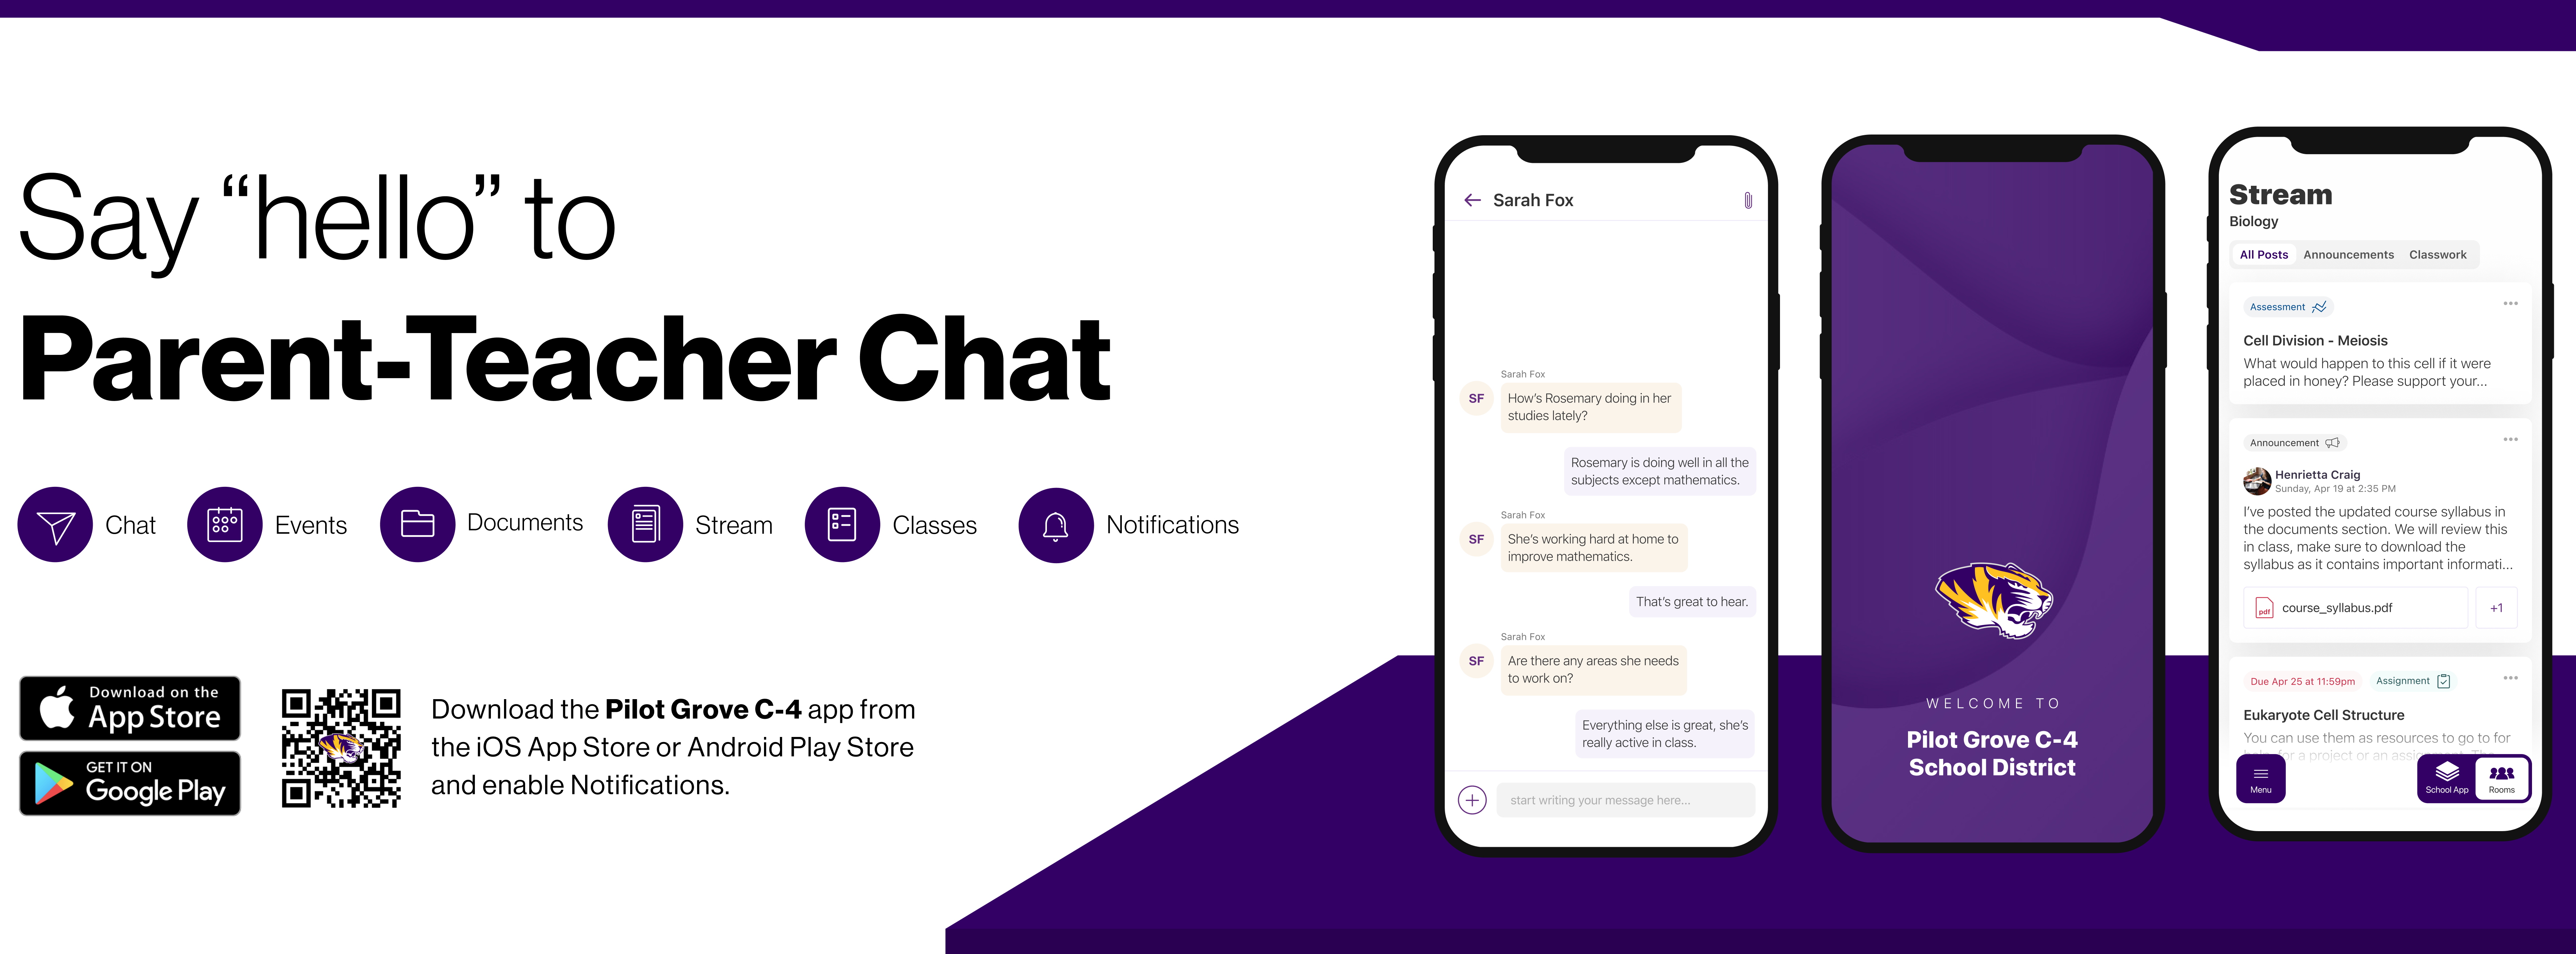 say hello to parent teacher chat. chat, events, stream, documents, chat, notifications. download the Pilot Grove c-4 app from the iOS app store or Android Play Store